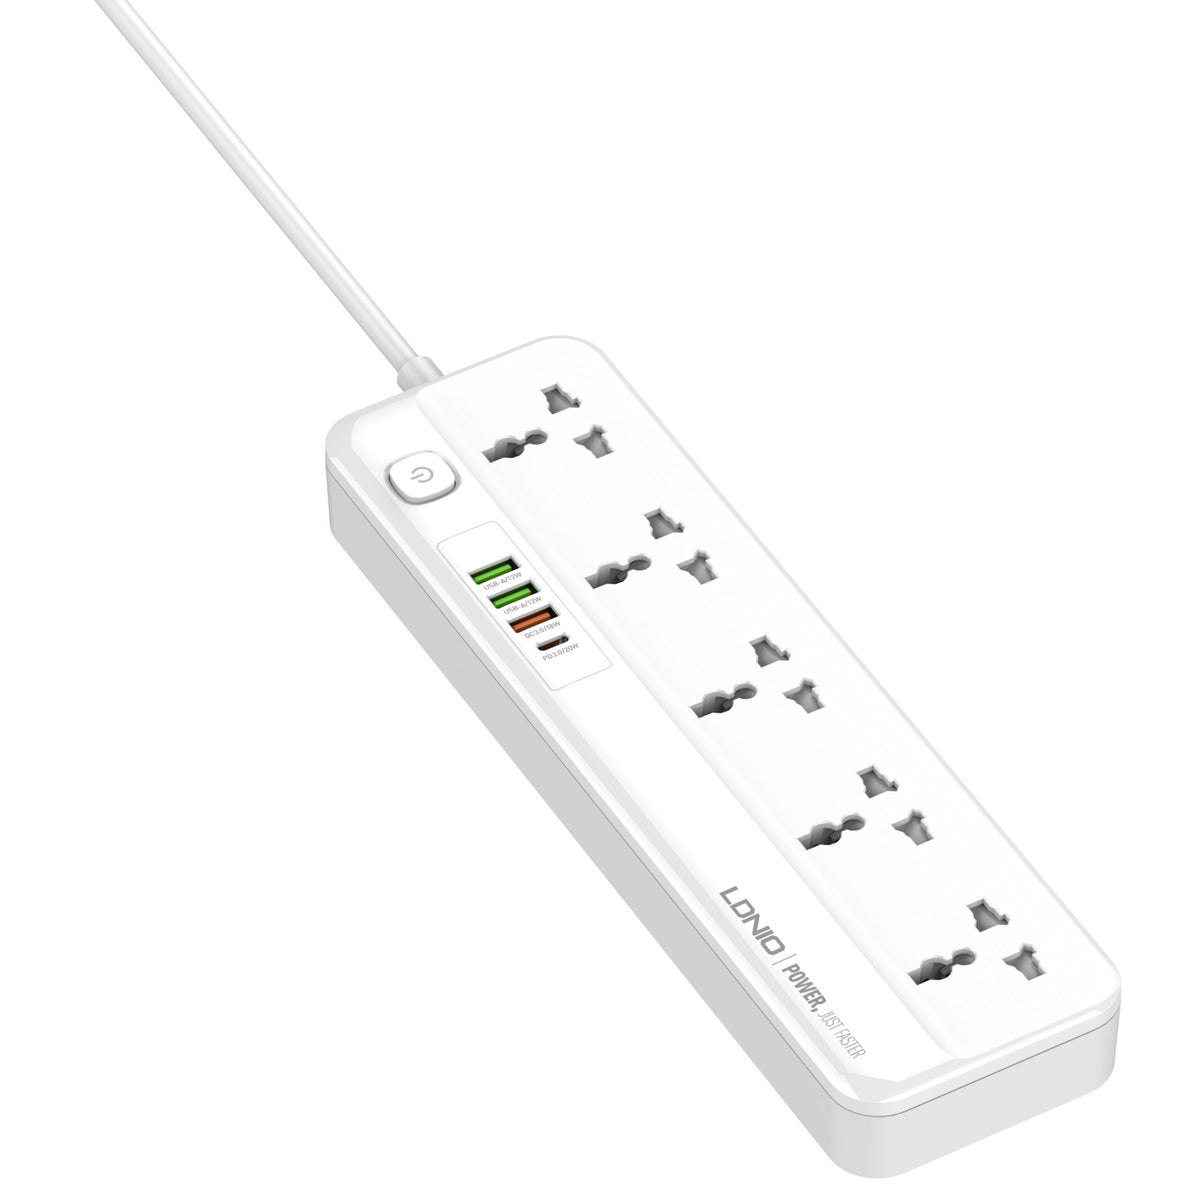 LDNIO Outlets Universal Power Strip SC5415